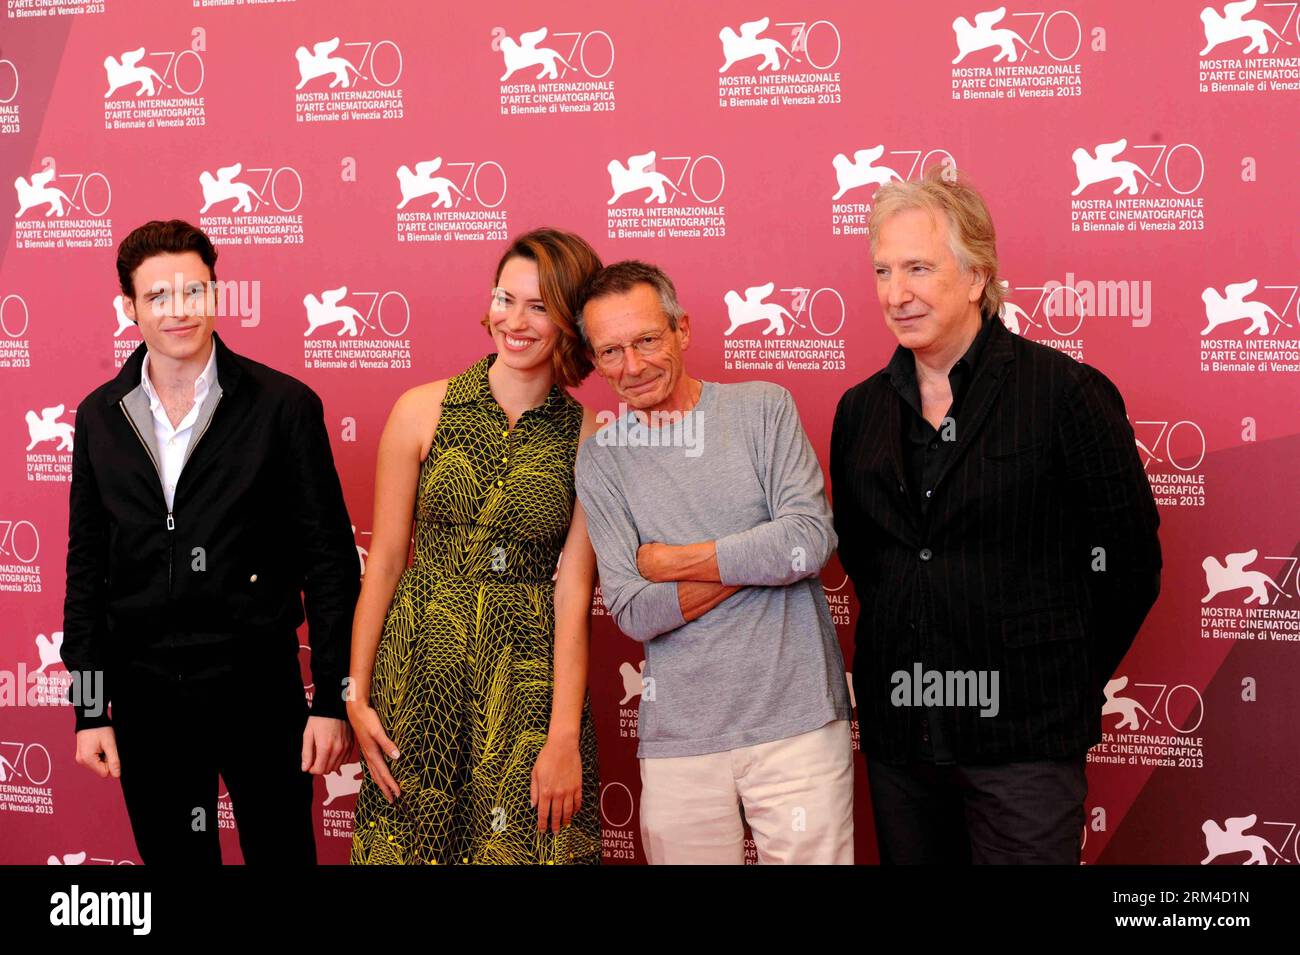 Bildnummer: 60434769  Datum: 04.09.2013  Copyright: imago/Xinhua (130904) -- VENICE, Sept. 4, 2013 (Xinhua) ¨CFrench director Patrice Leconte(3rd L),actor Alan rickman (1st R),actress Rebecca Hall(2nd L),actor Richard Madden(1st L) pose at the photocall of the screening of Une promesse during the 70th Venice Film Festival, in Lido of Venice, Italy, on Sept. 4, 2013. (Xinhua/Xu Nizhi) ITALY-VENICE-FILM-FESTIVAL-UNE PROMESSE PUBLICATIONxNOTxINxCHN Kultur Entertainment People Film 70 Internationale Filmfestspiele Venedig xas x0x 2013 quer premiumd      60434769 Date 04 09 2013 Copyright Imago XIN Stock Photo